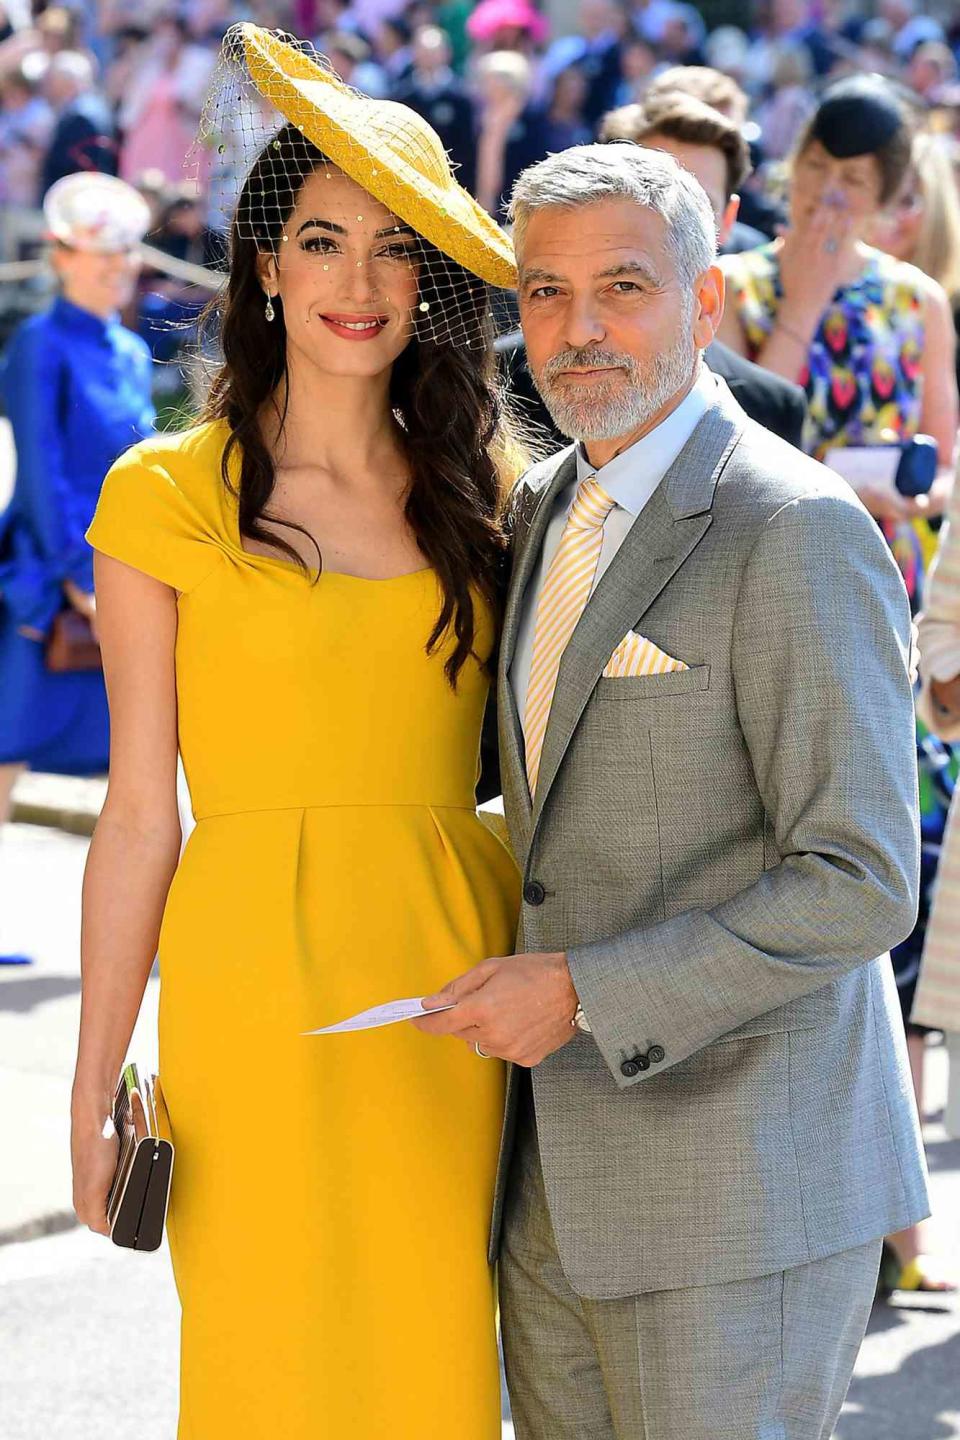 Amal and George Clooney arrive at St George's Chapel at Windsor Castle before the wedding of Prince Harry to Meghan Markle on May 19, 2018 in Windsor, England